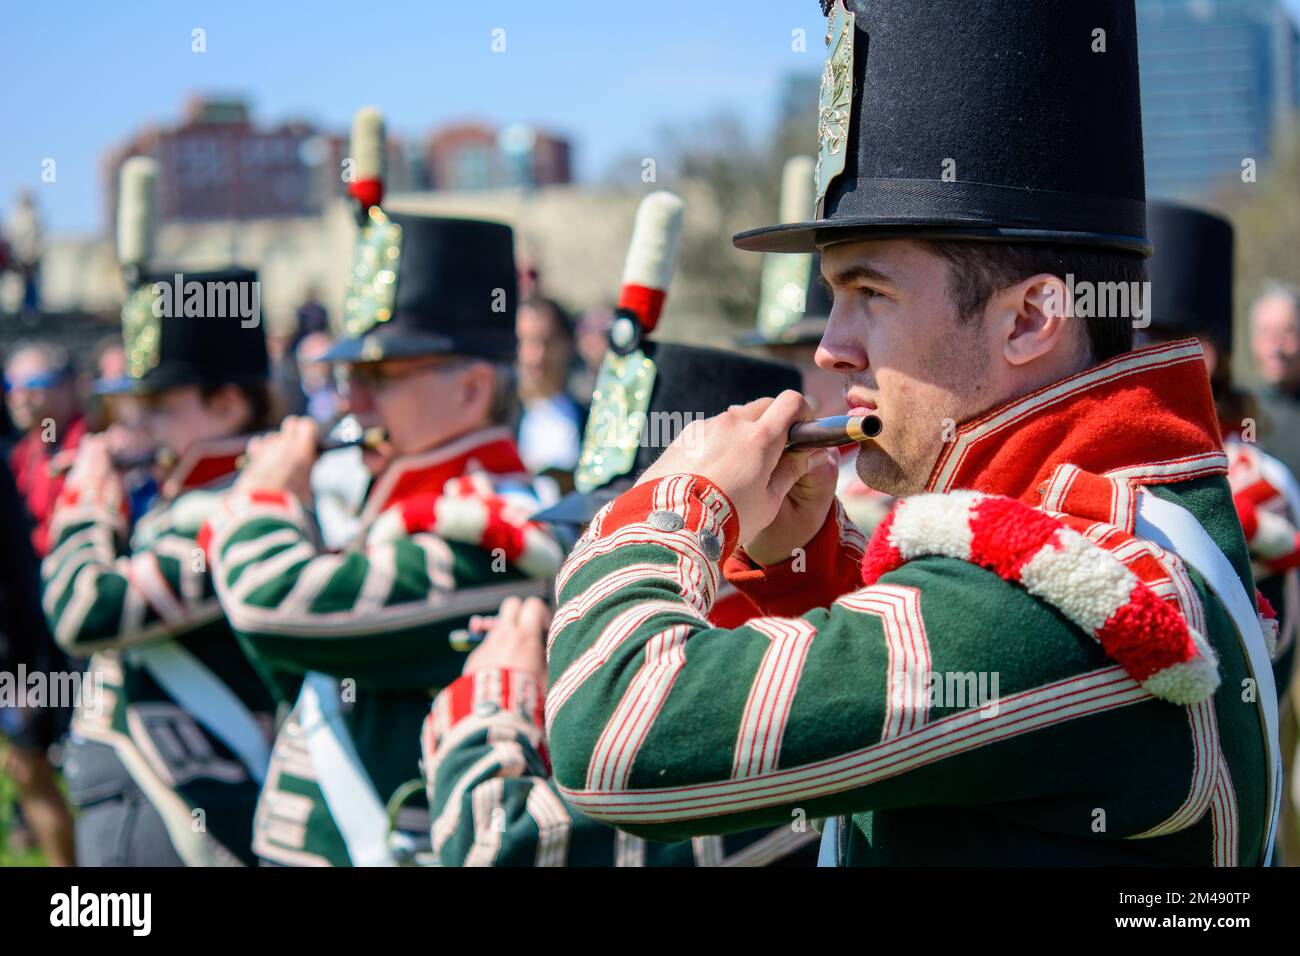 The image was taken during the celebrations for the 200th anniversary of the Battle of York in Toronto, Canada, in 2013 Stock Photo